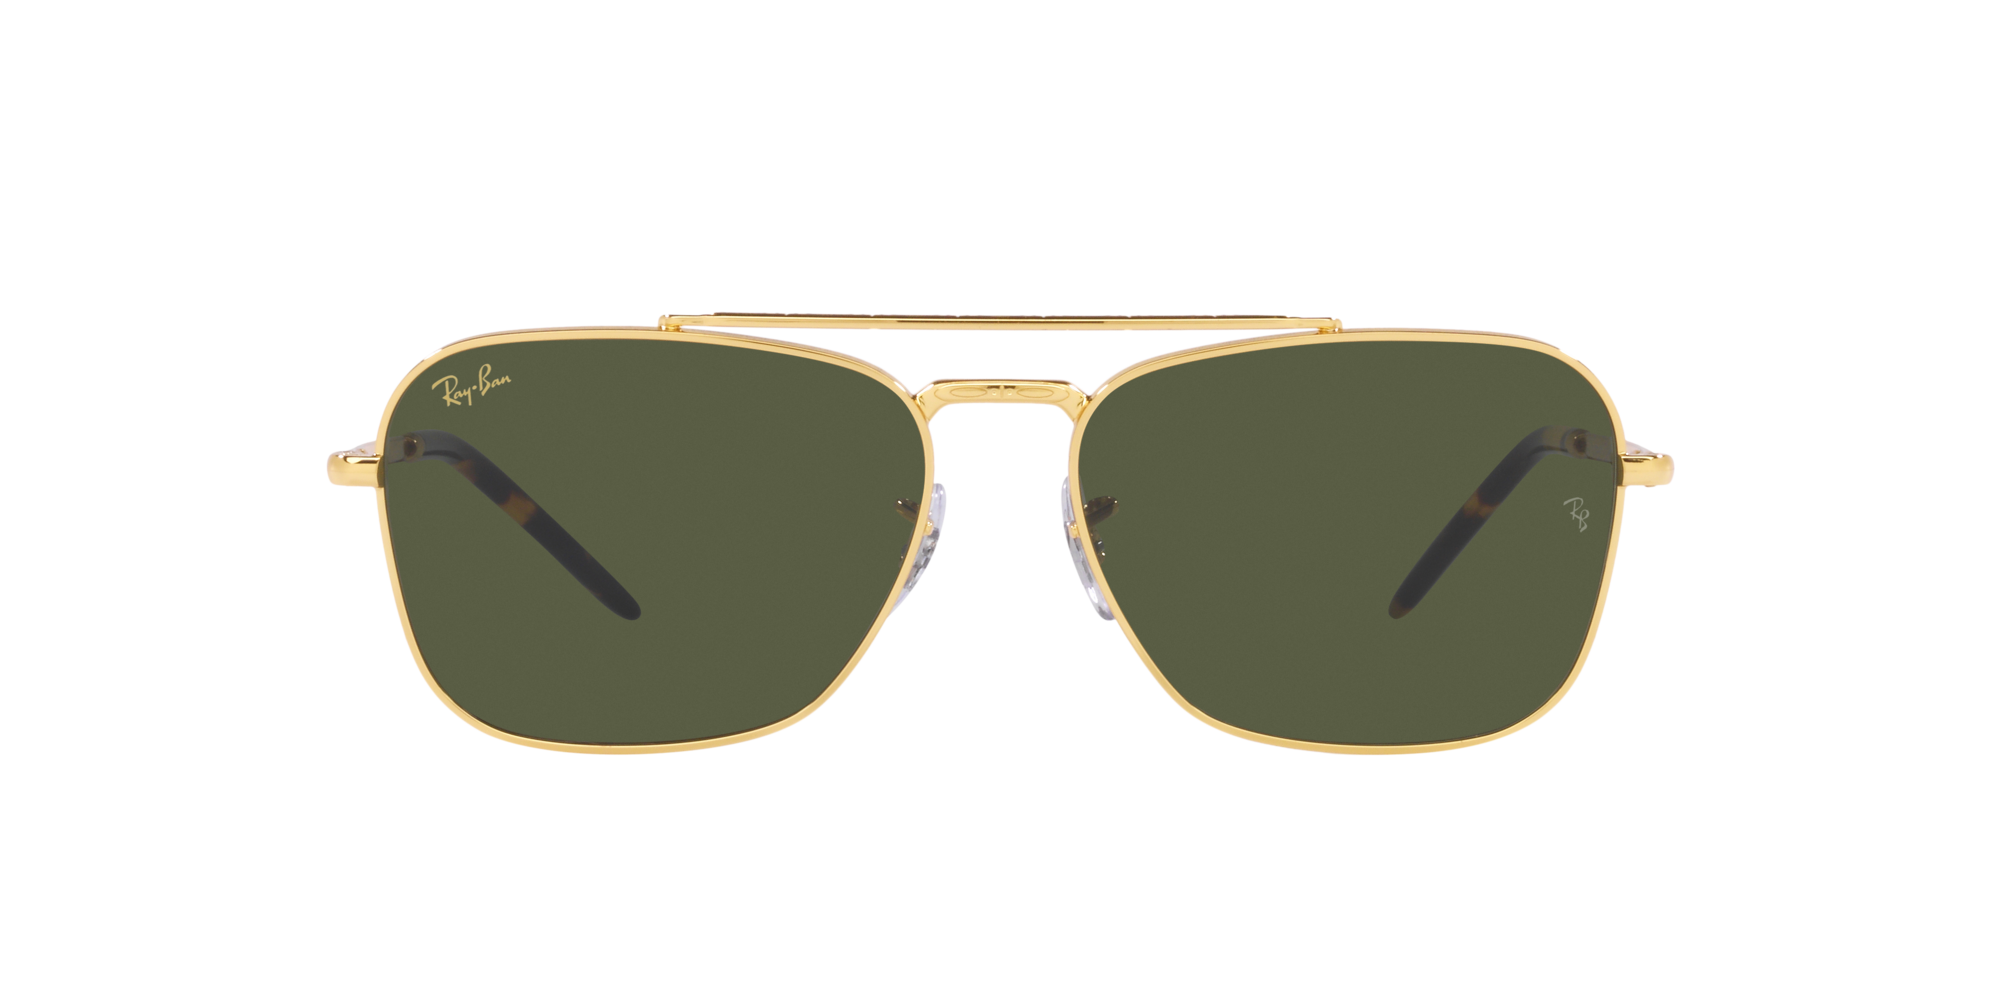 New Caravan Ray Ban Sonnenbrille in Gold RB3636 919631 58